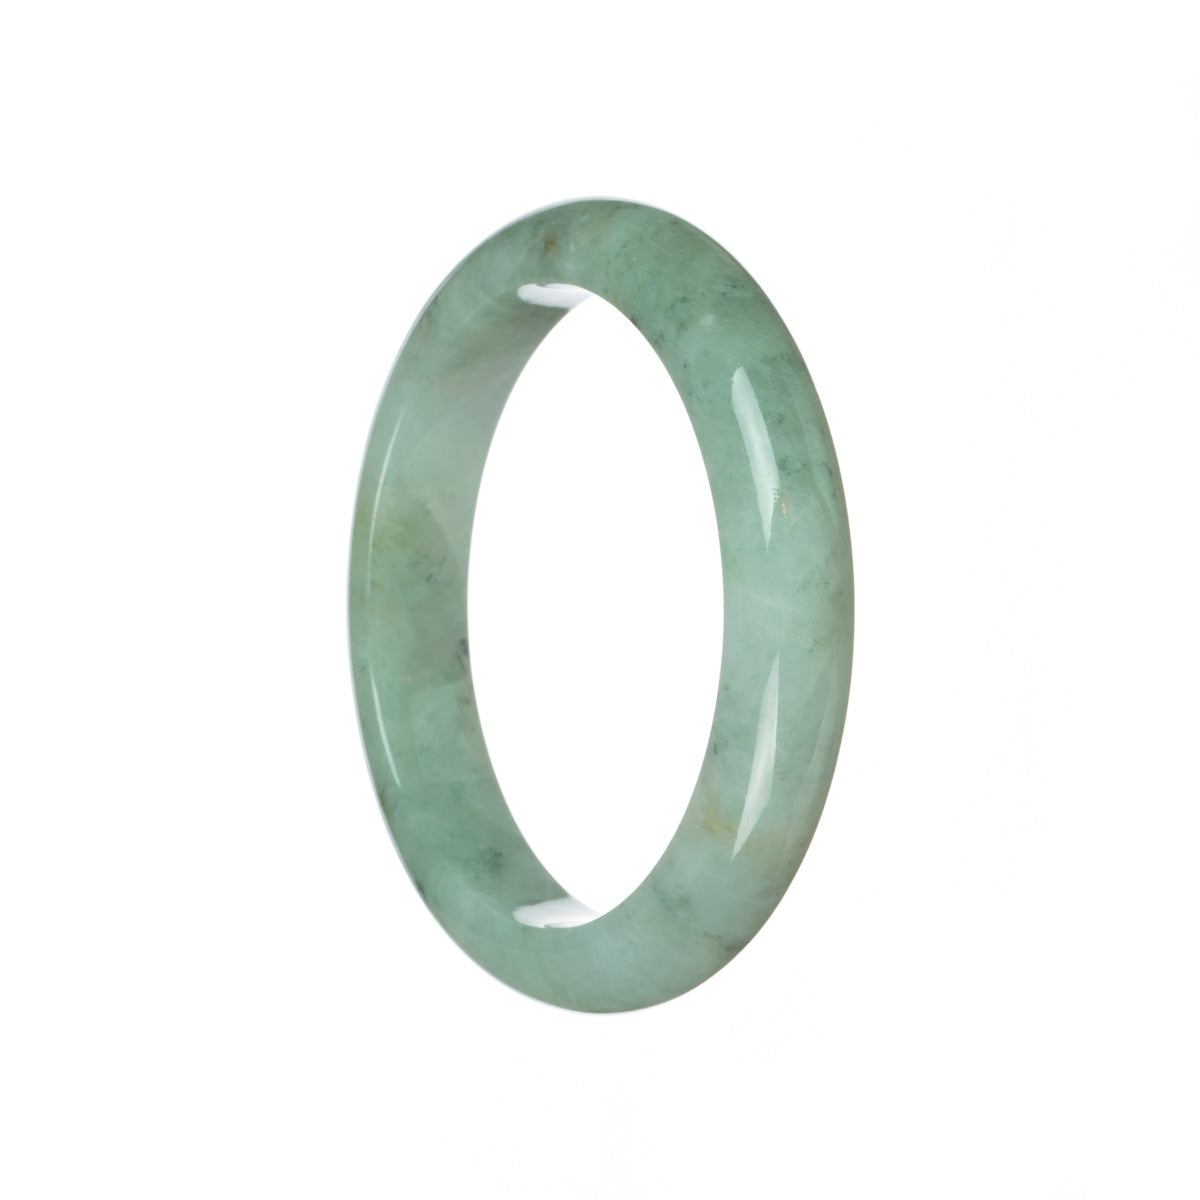 Real Type A Light grey with grey spots Traditional Jade Bracelet - 60mm Semi Round